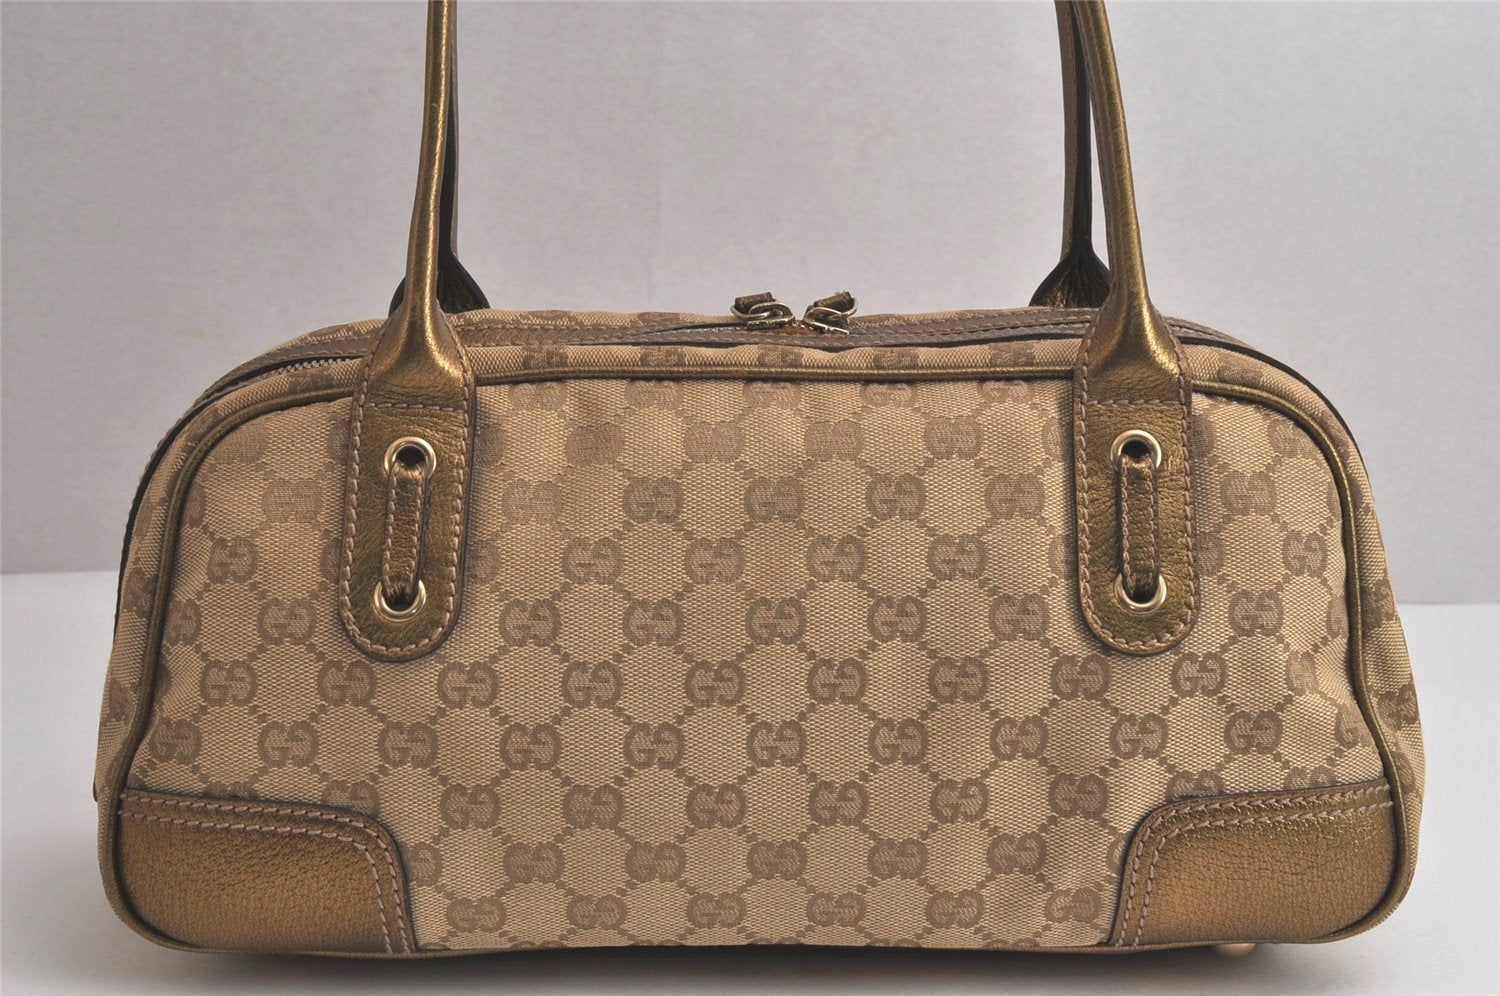 Authentic GUCCI Princy Ribbon GG Canvas Leather Hand Bag 161720 Beige 0217K